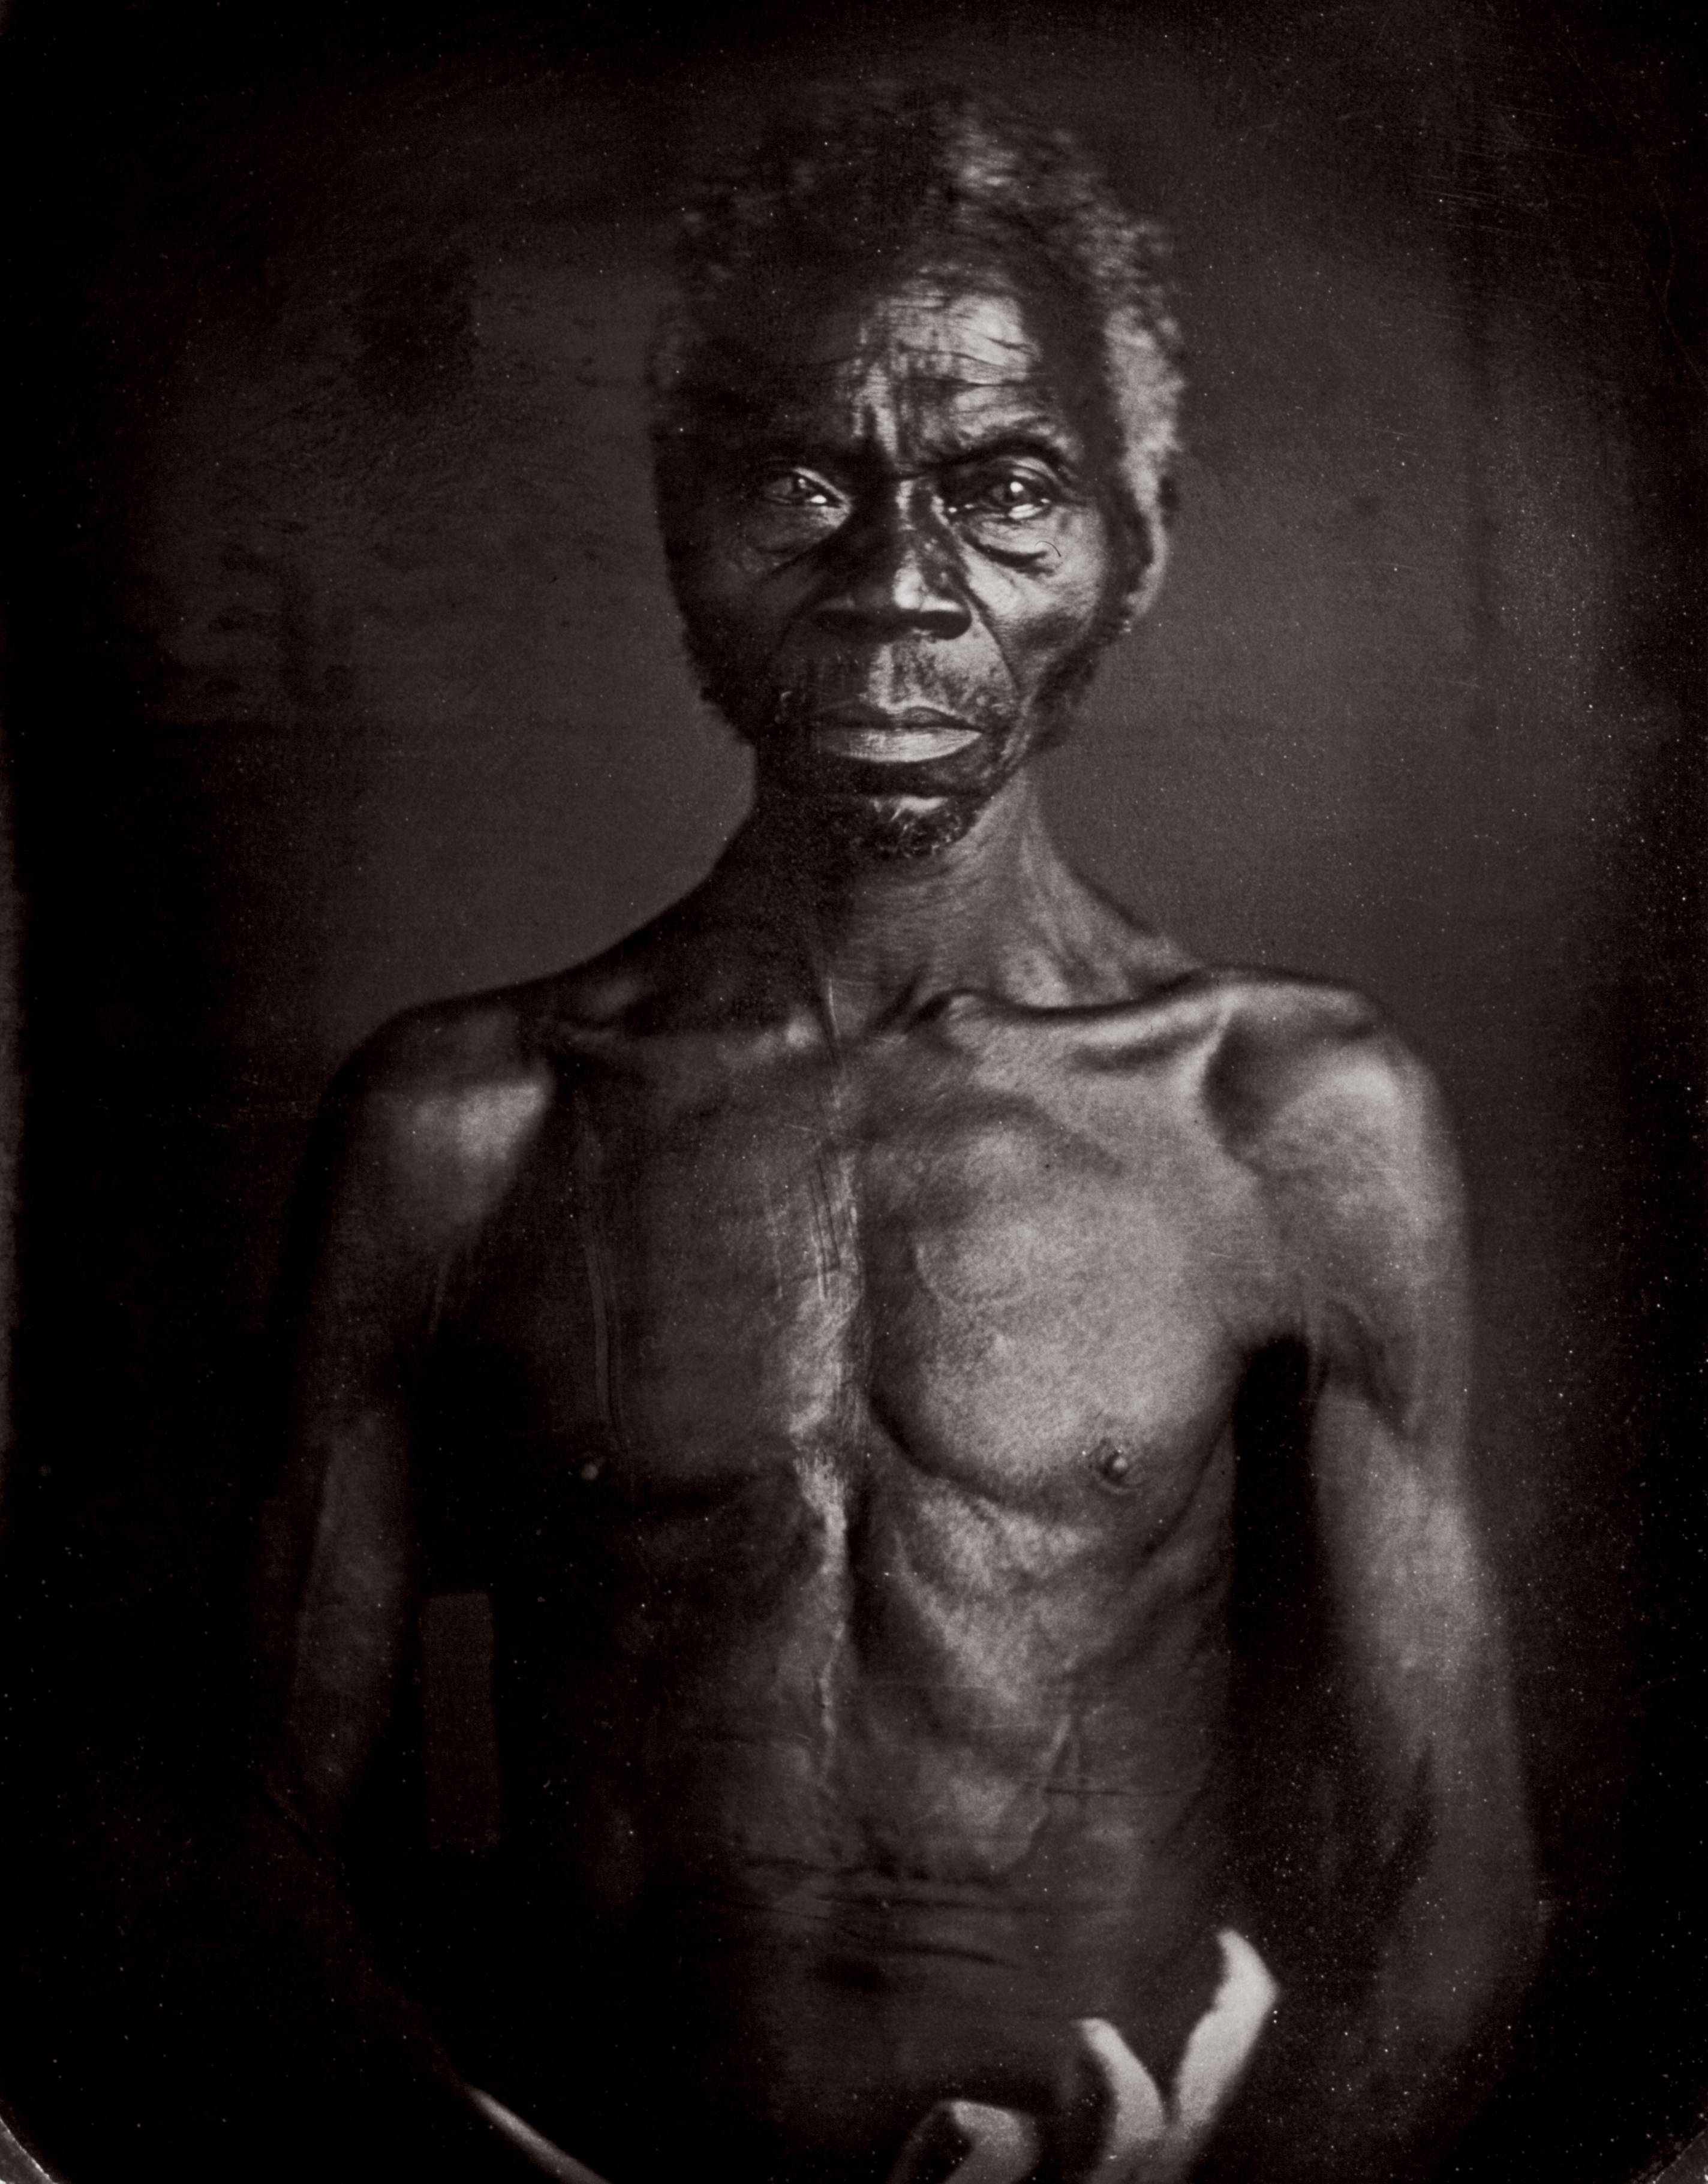 This man, Renty, was an African-born slave owned by B.F. Taylor from Columbia, South Carolina when this portrait was taken in 1850